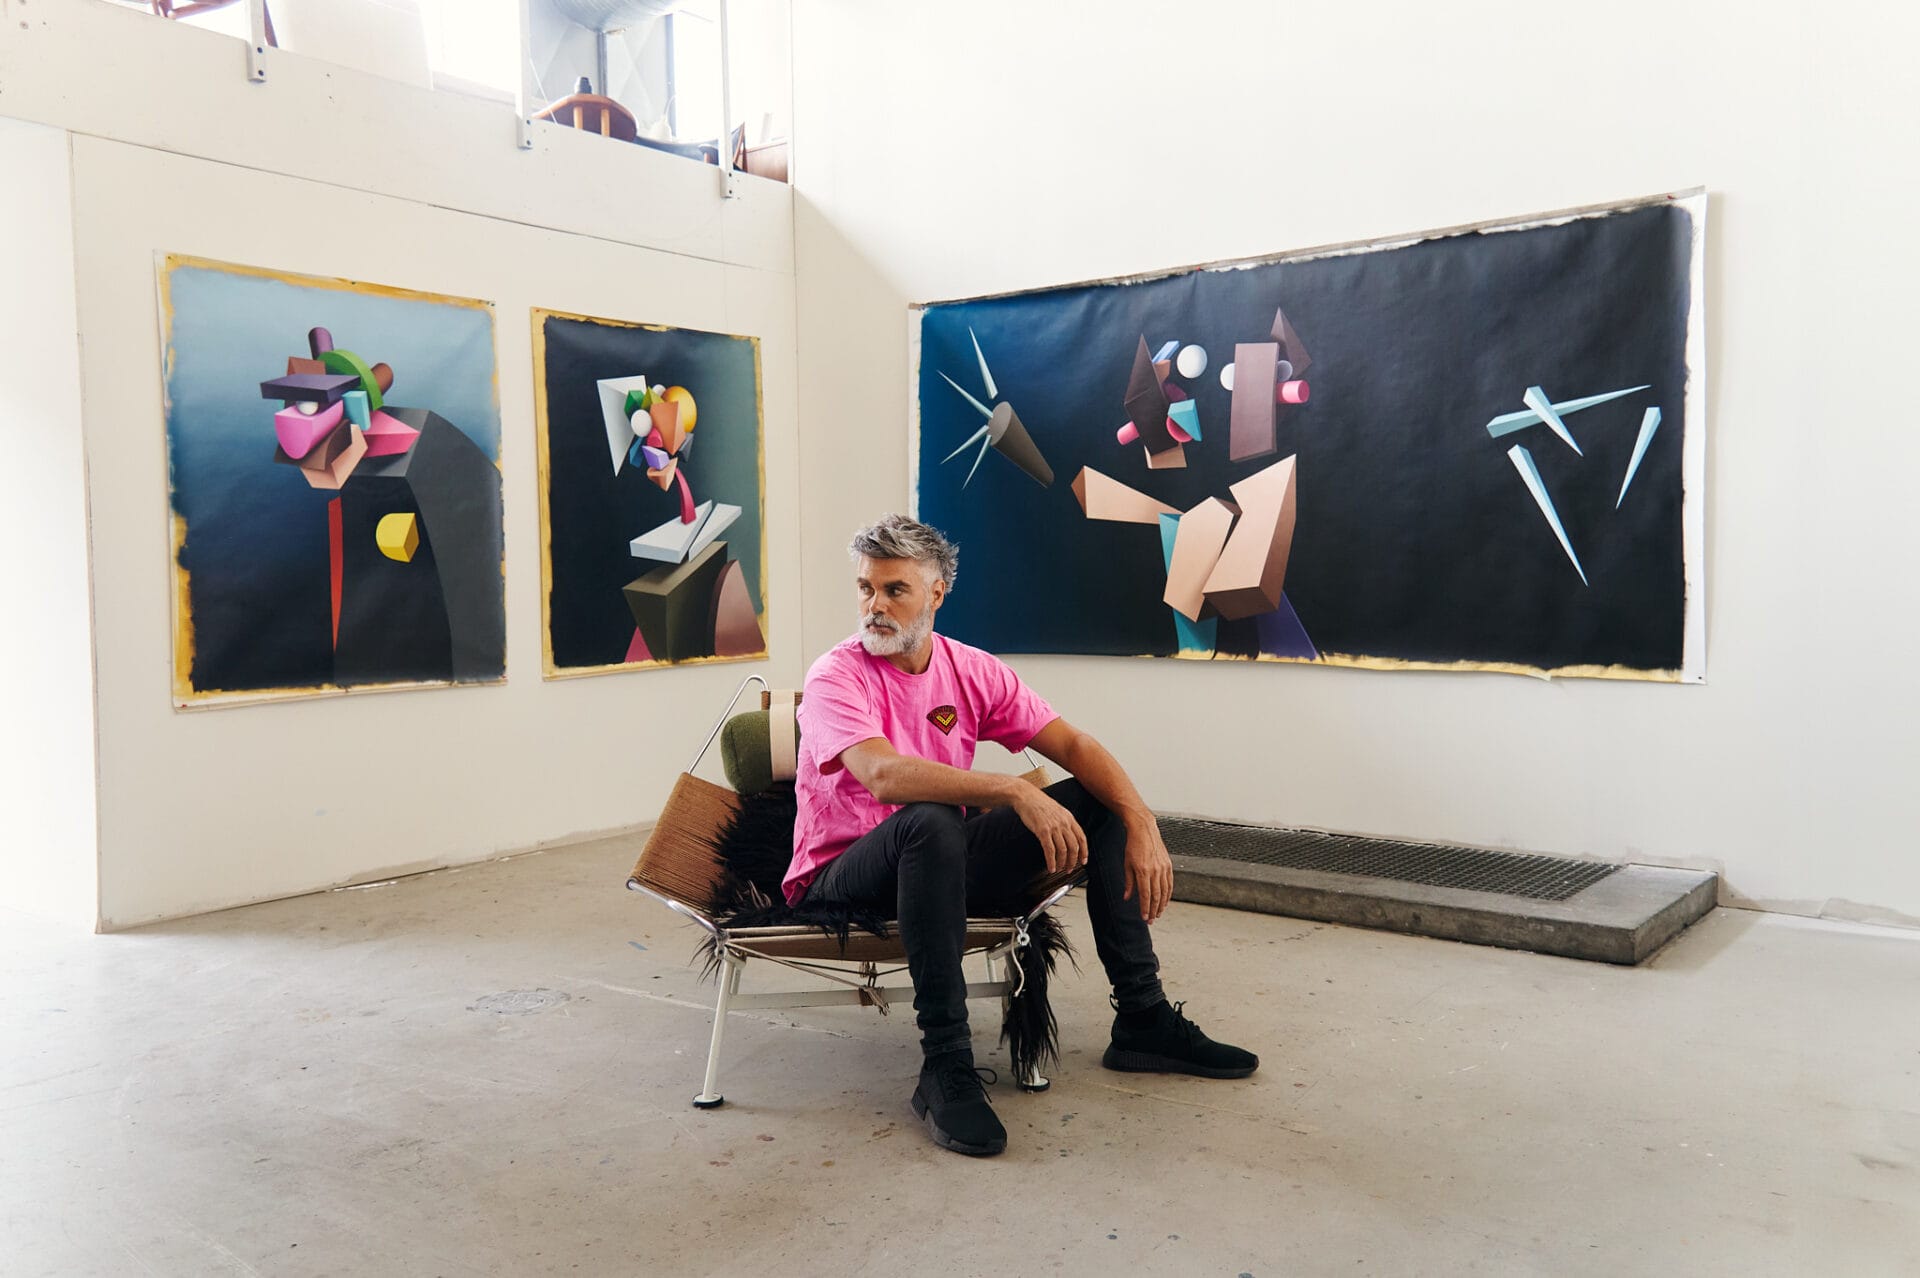 the artist wears a pink shirt and black pants and sits on a fur-covered chair in a studio with three portraits lining the walls